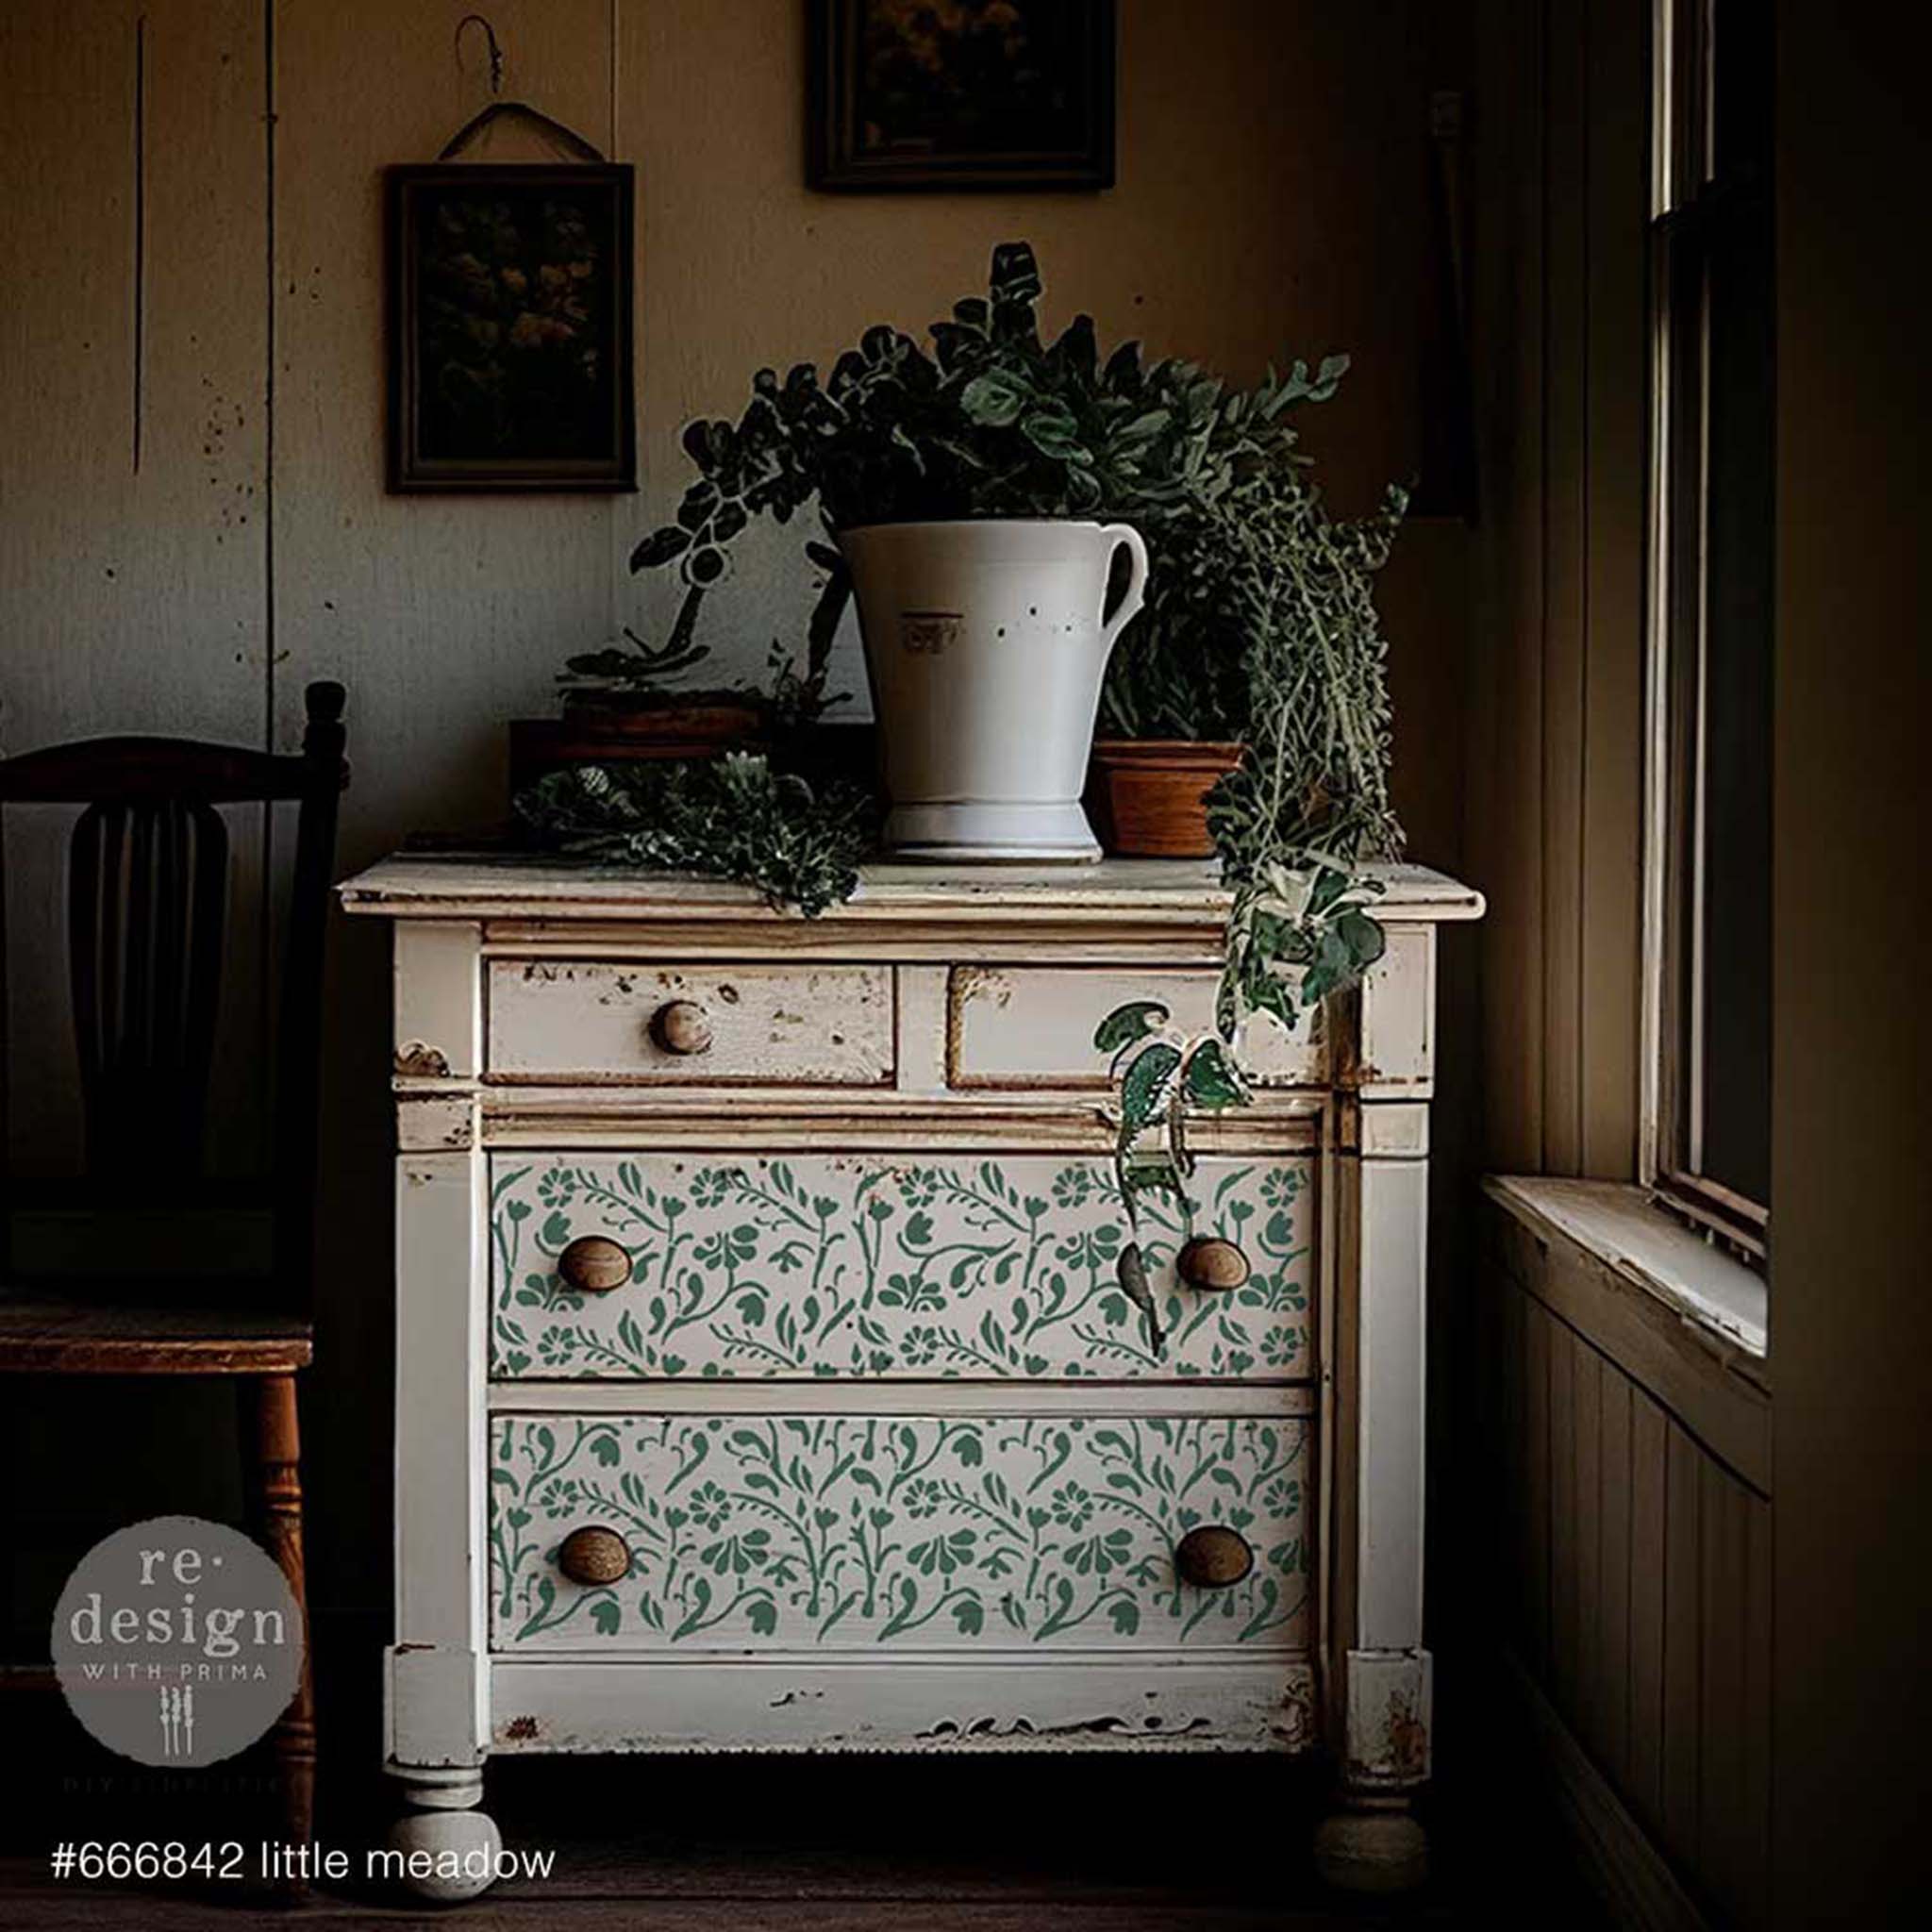 A vintage 4-drawer dresser painted light beige features ReDesign with Prima's Little Meadow stencil in green on the bottom 2 drawers.